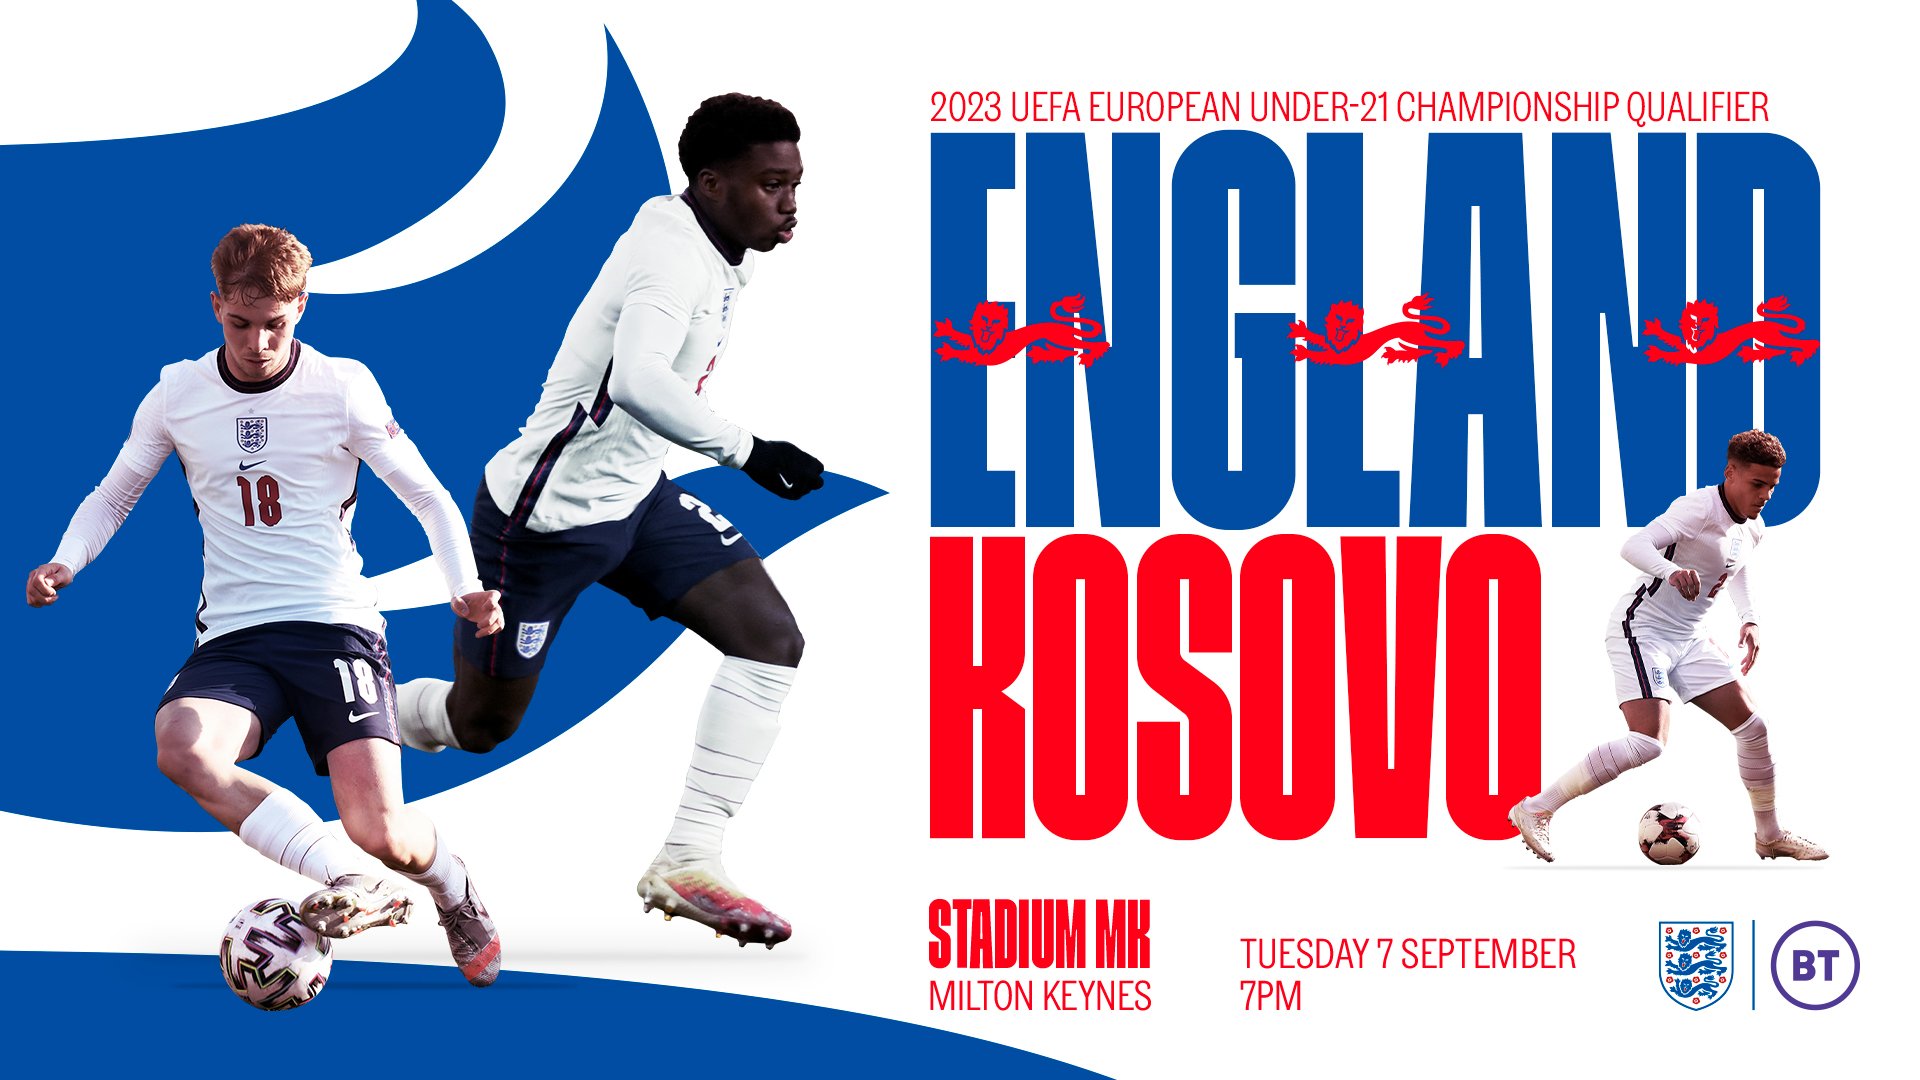 England’s Young Lions are coming to Stadium MK